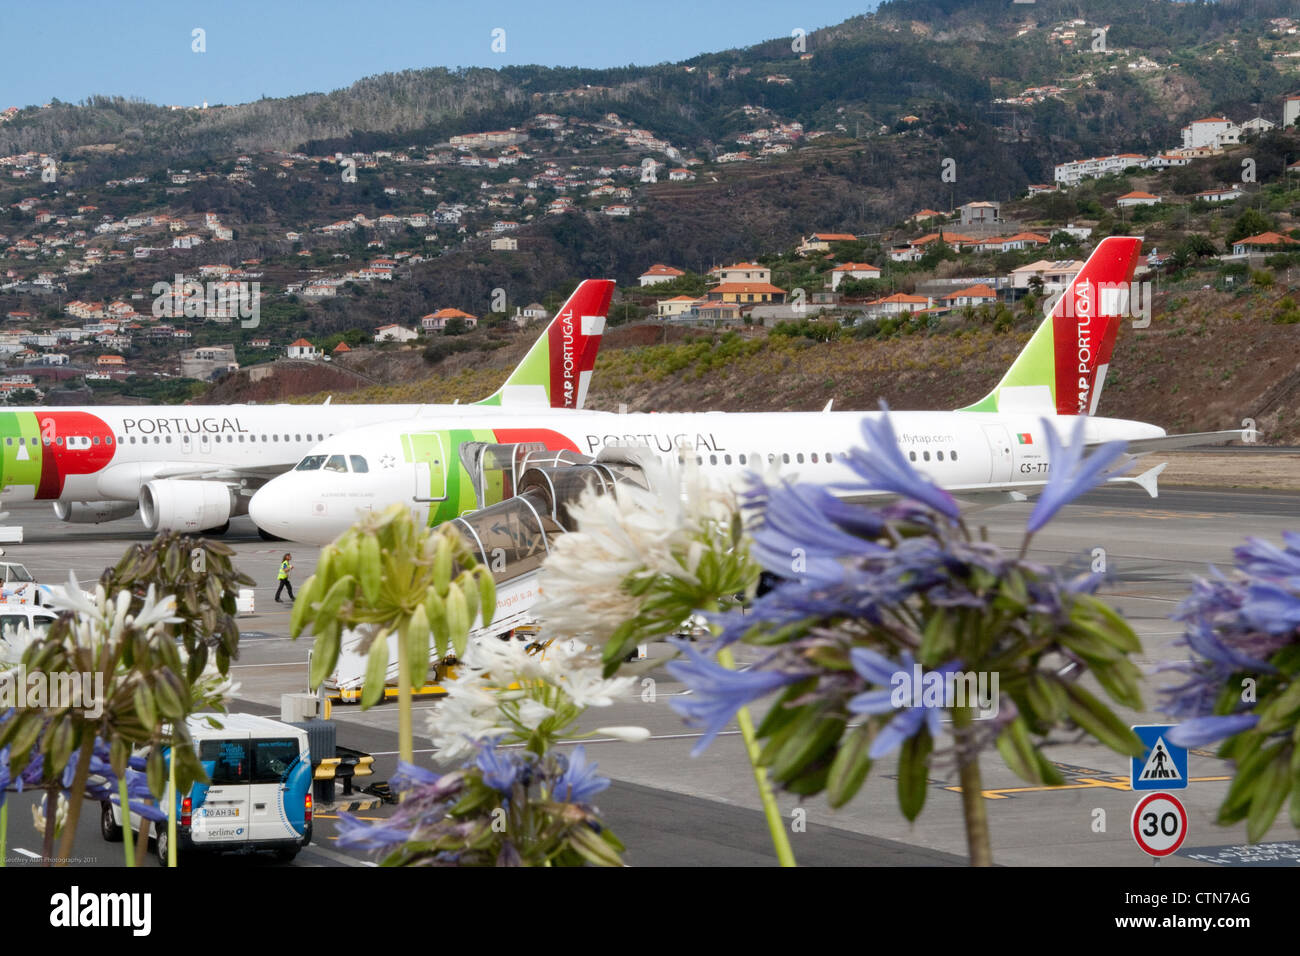 TAP Portugal Airlines Aircraft parked at Funchal Airport Madeira Stock Photo